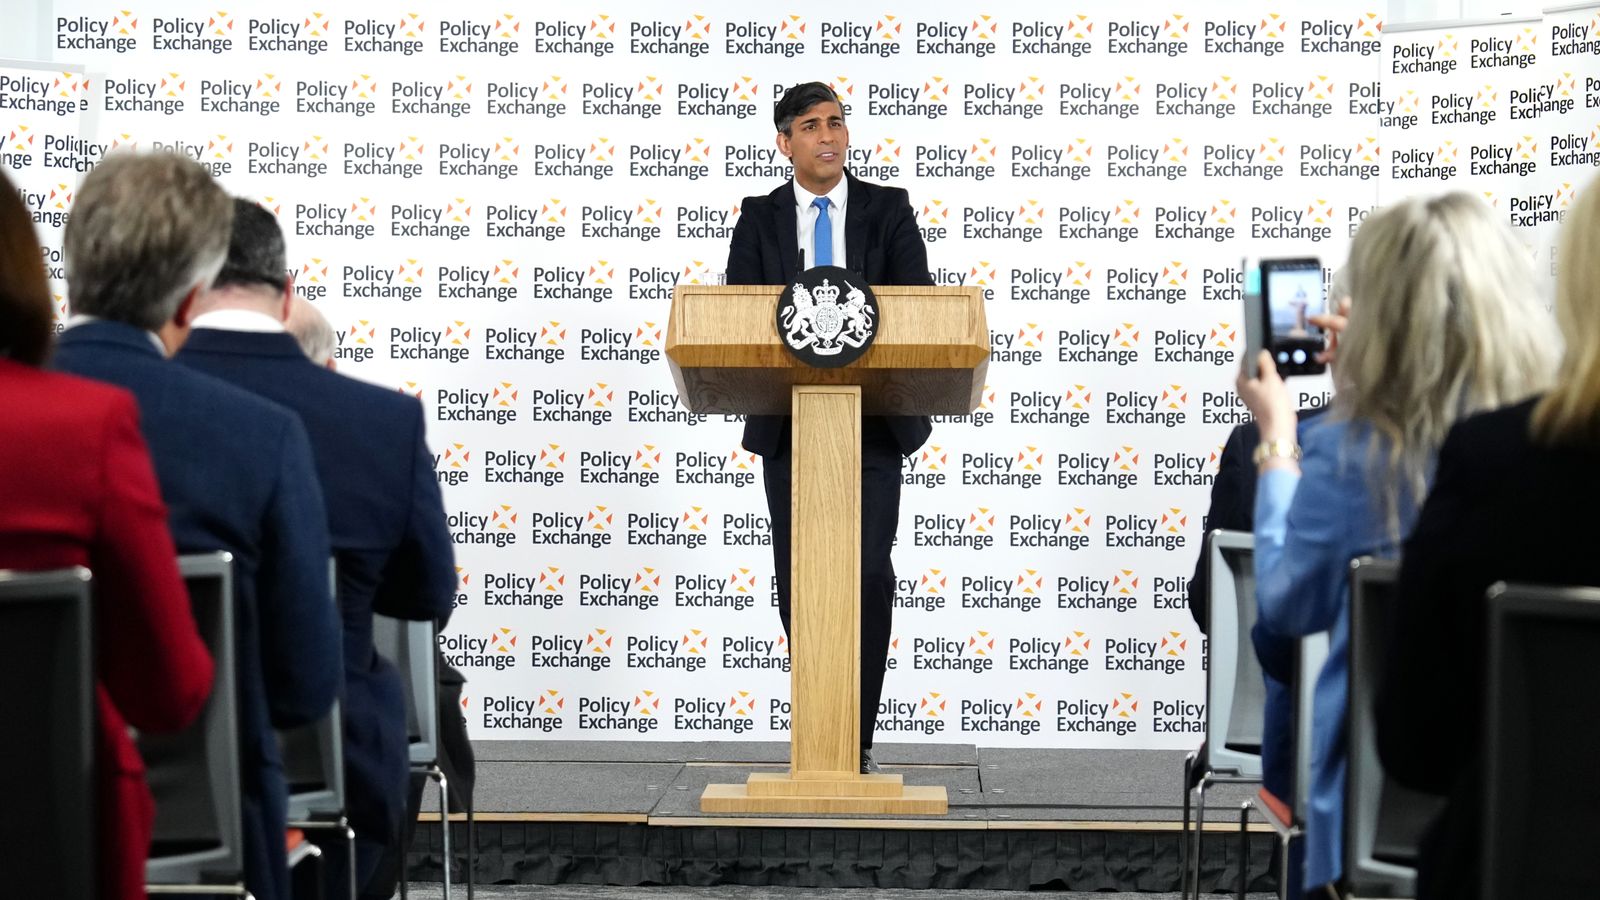 Rishi Sunak warns of 'nuclear escalation' threat - as he refuses to set general election date